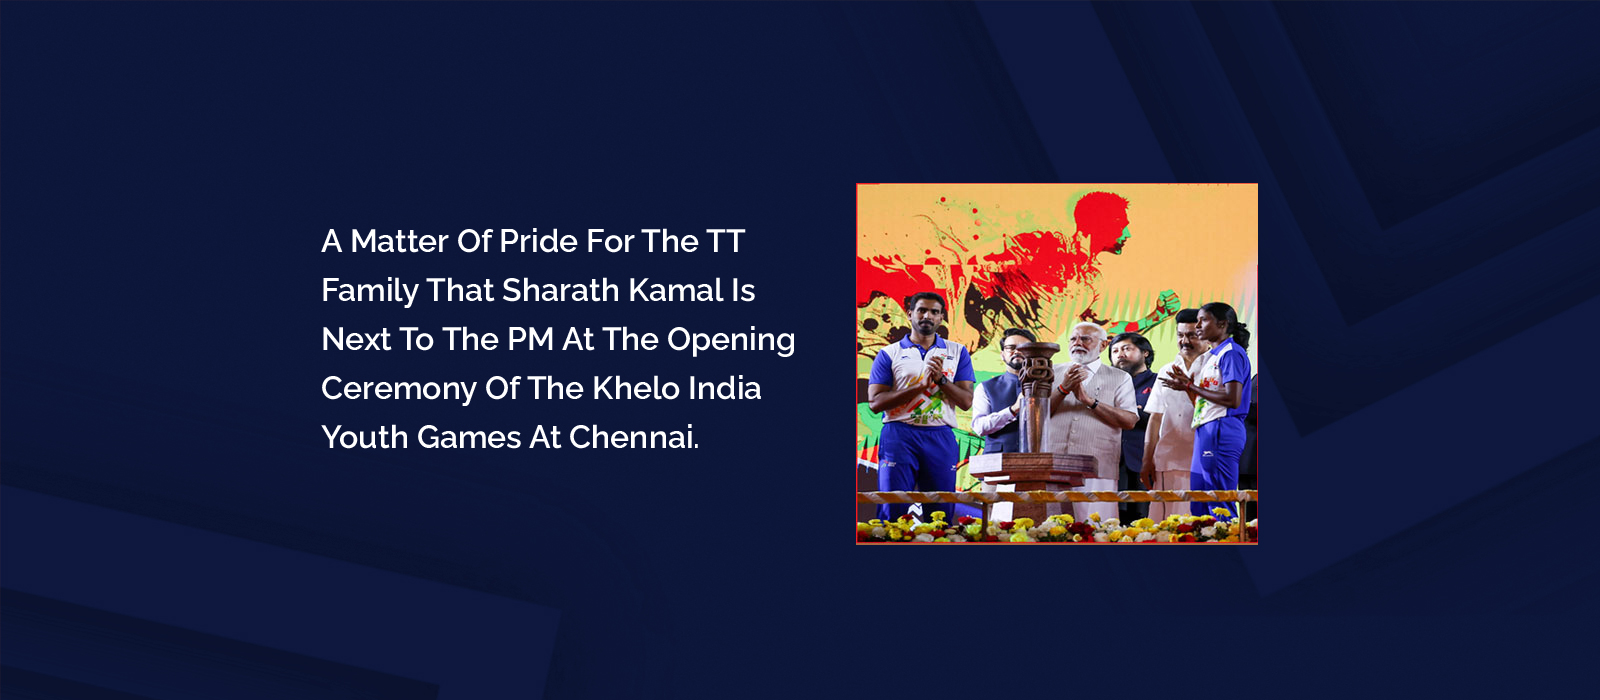 A matter of pride for the TT family that Sharath Kamal is next to the PM at the opening ceremony of the Khelo India Youth Games at Chennai.